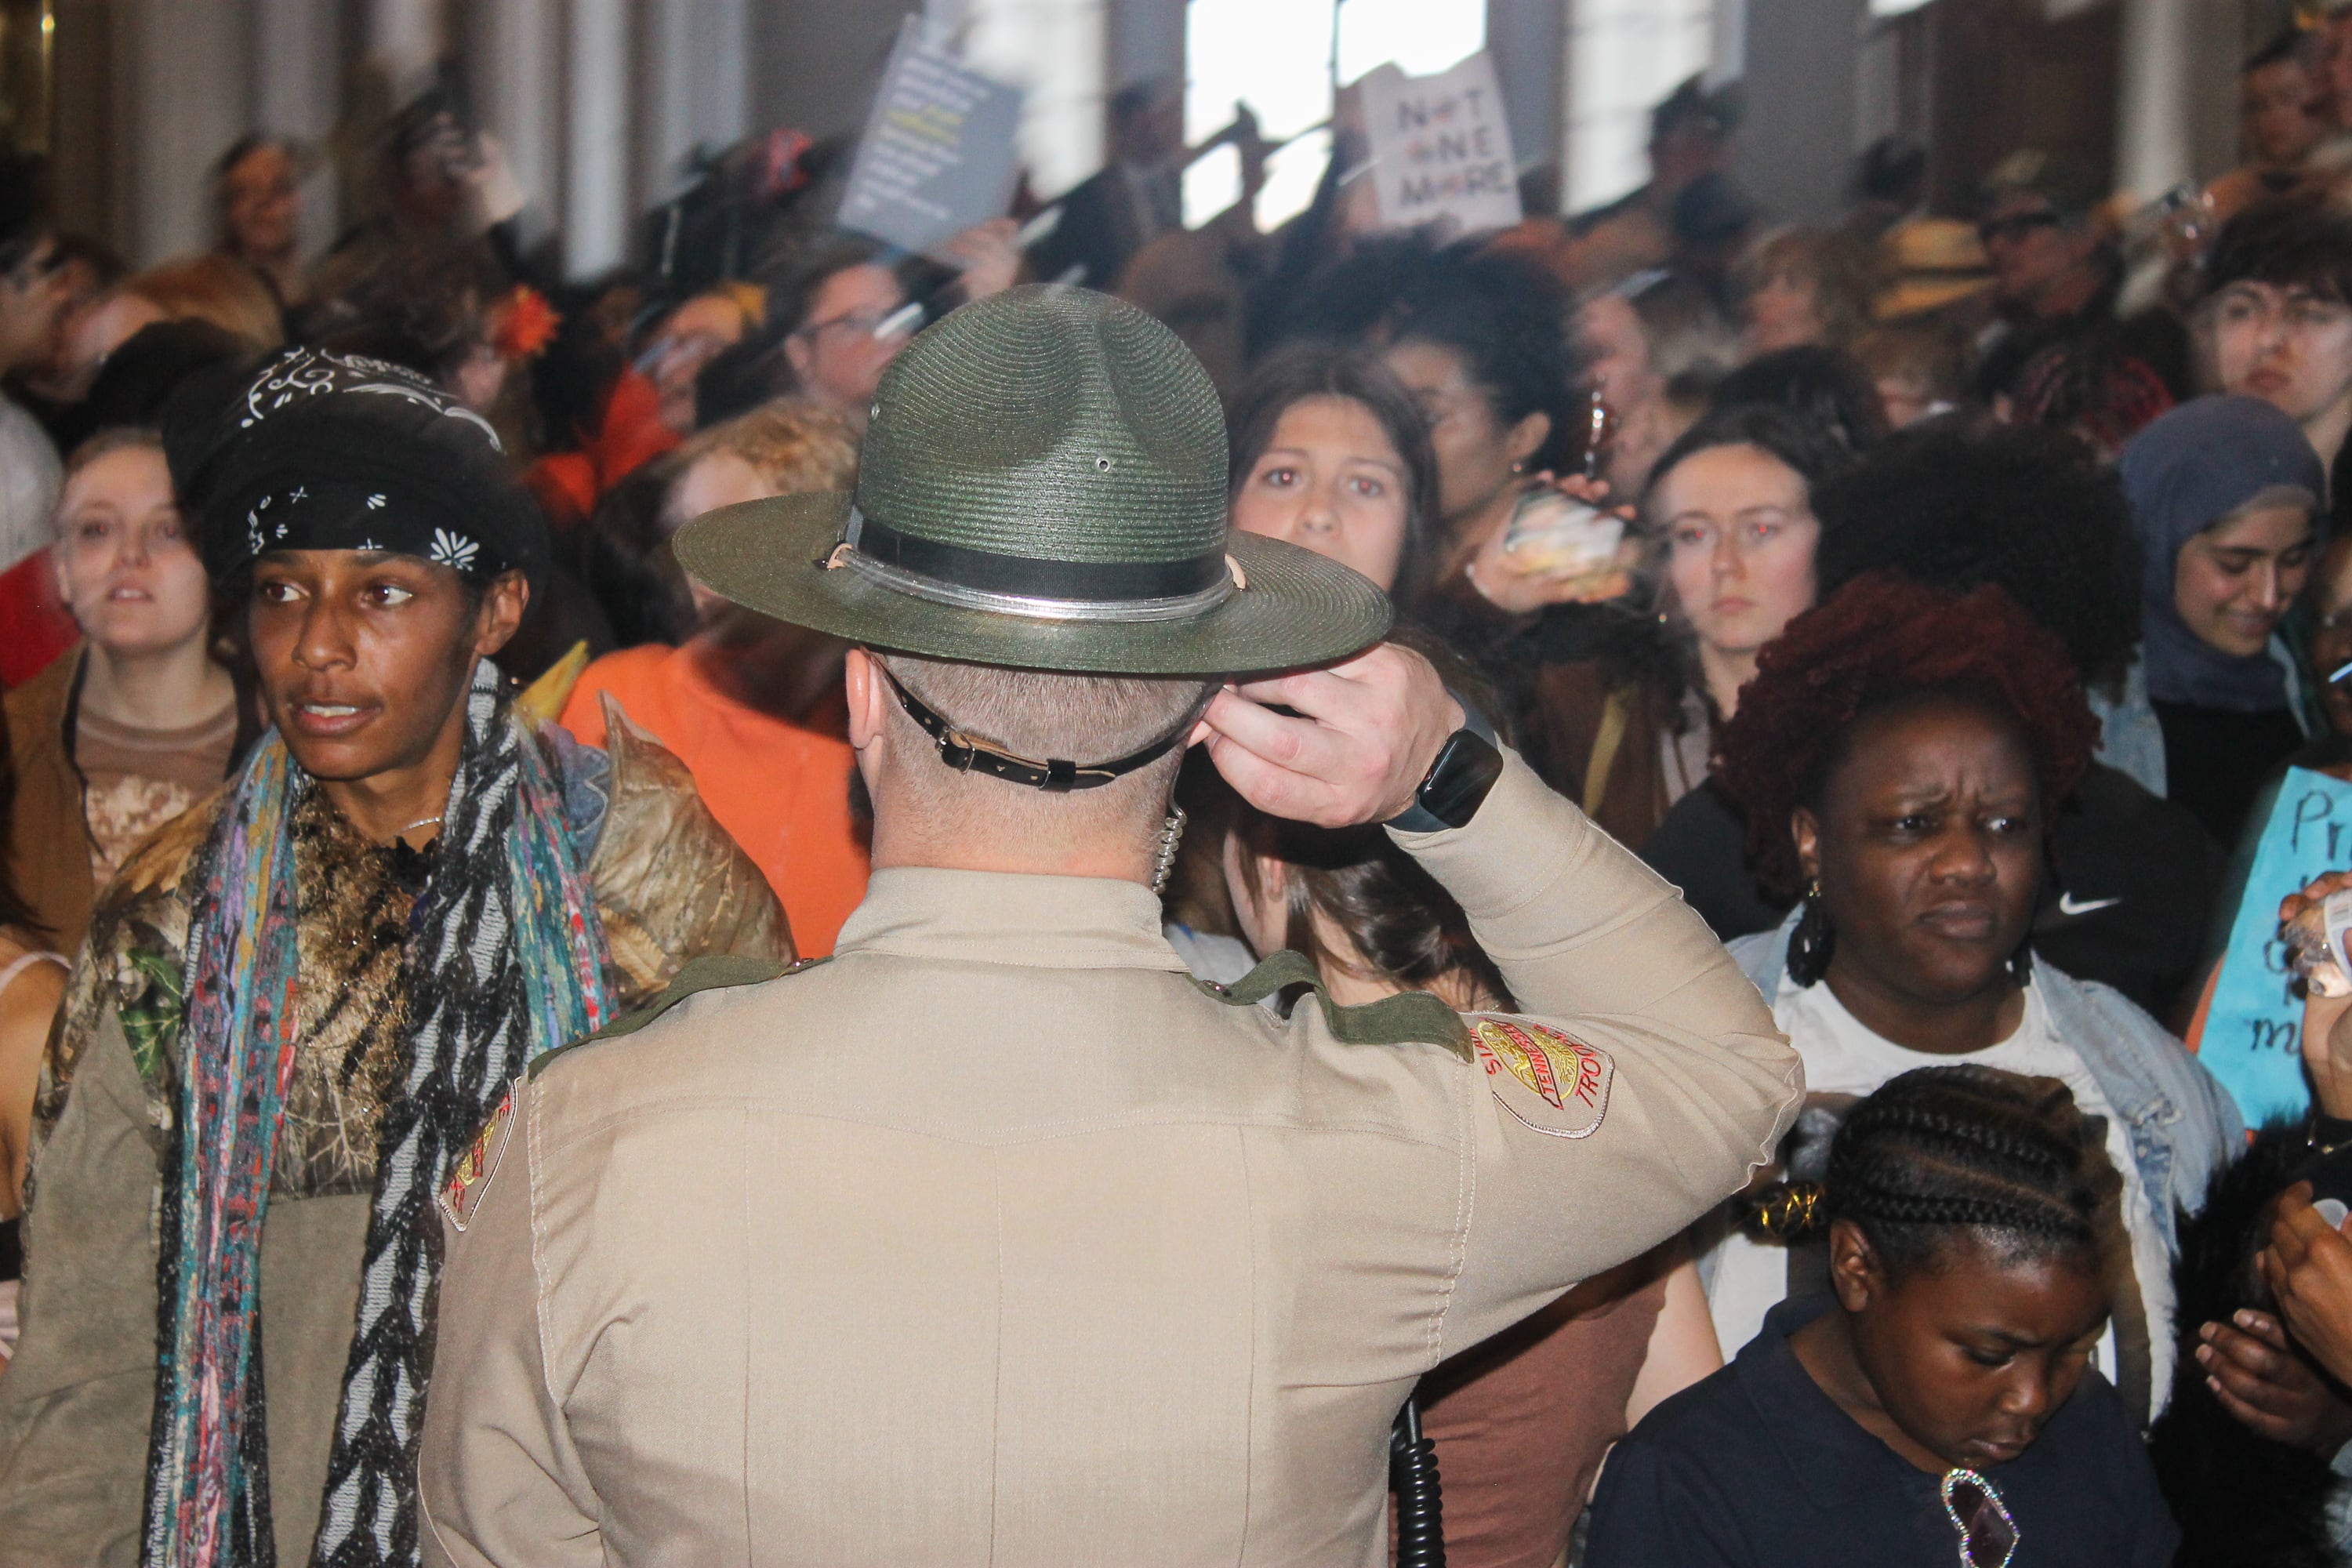 A law enforcement officer stands in front of a crowd of protesters.